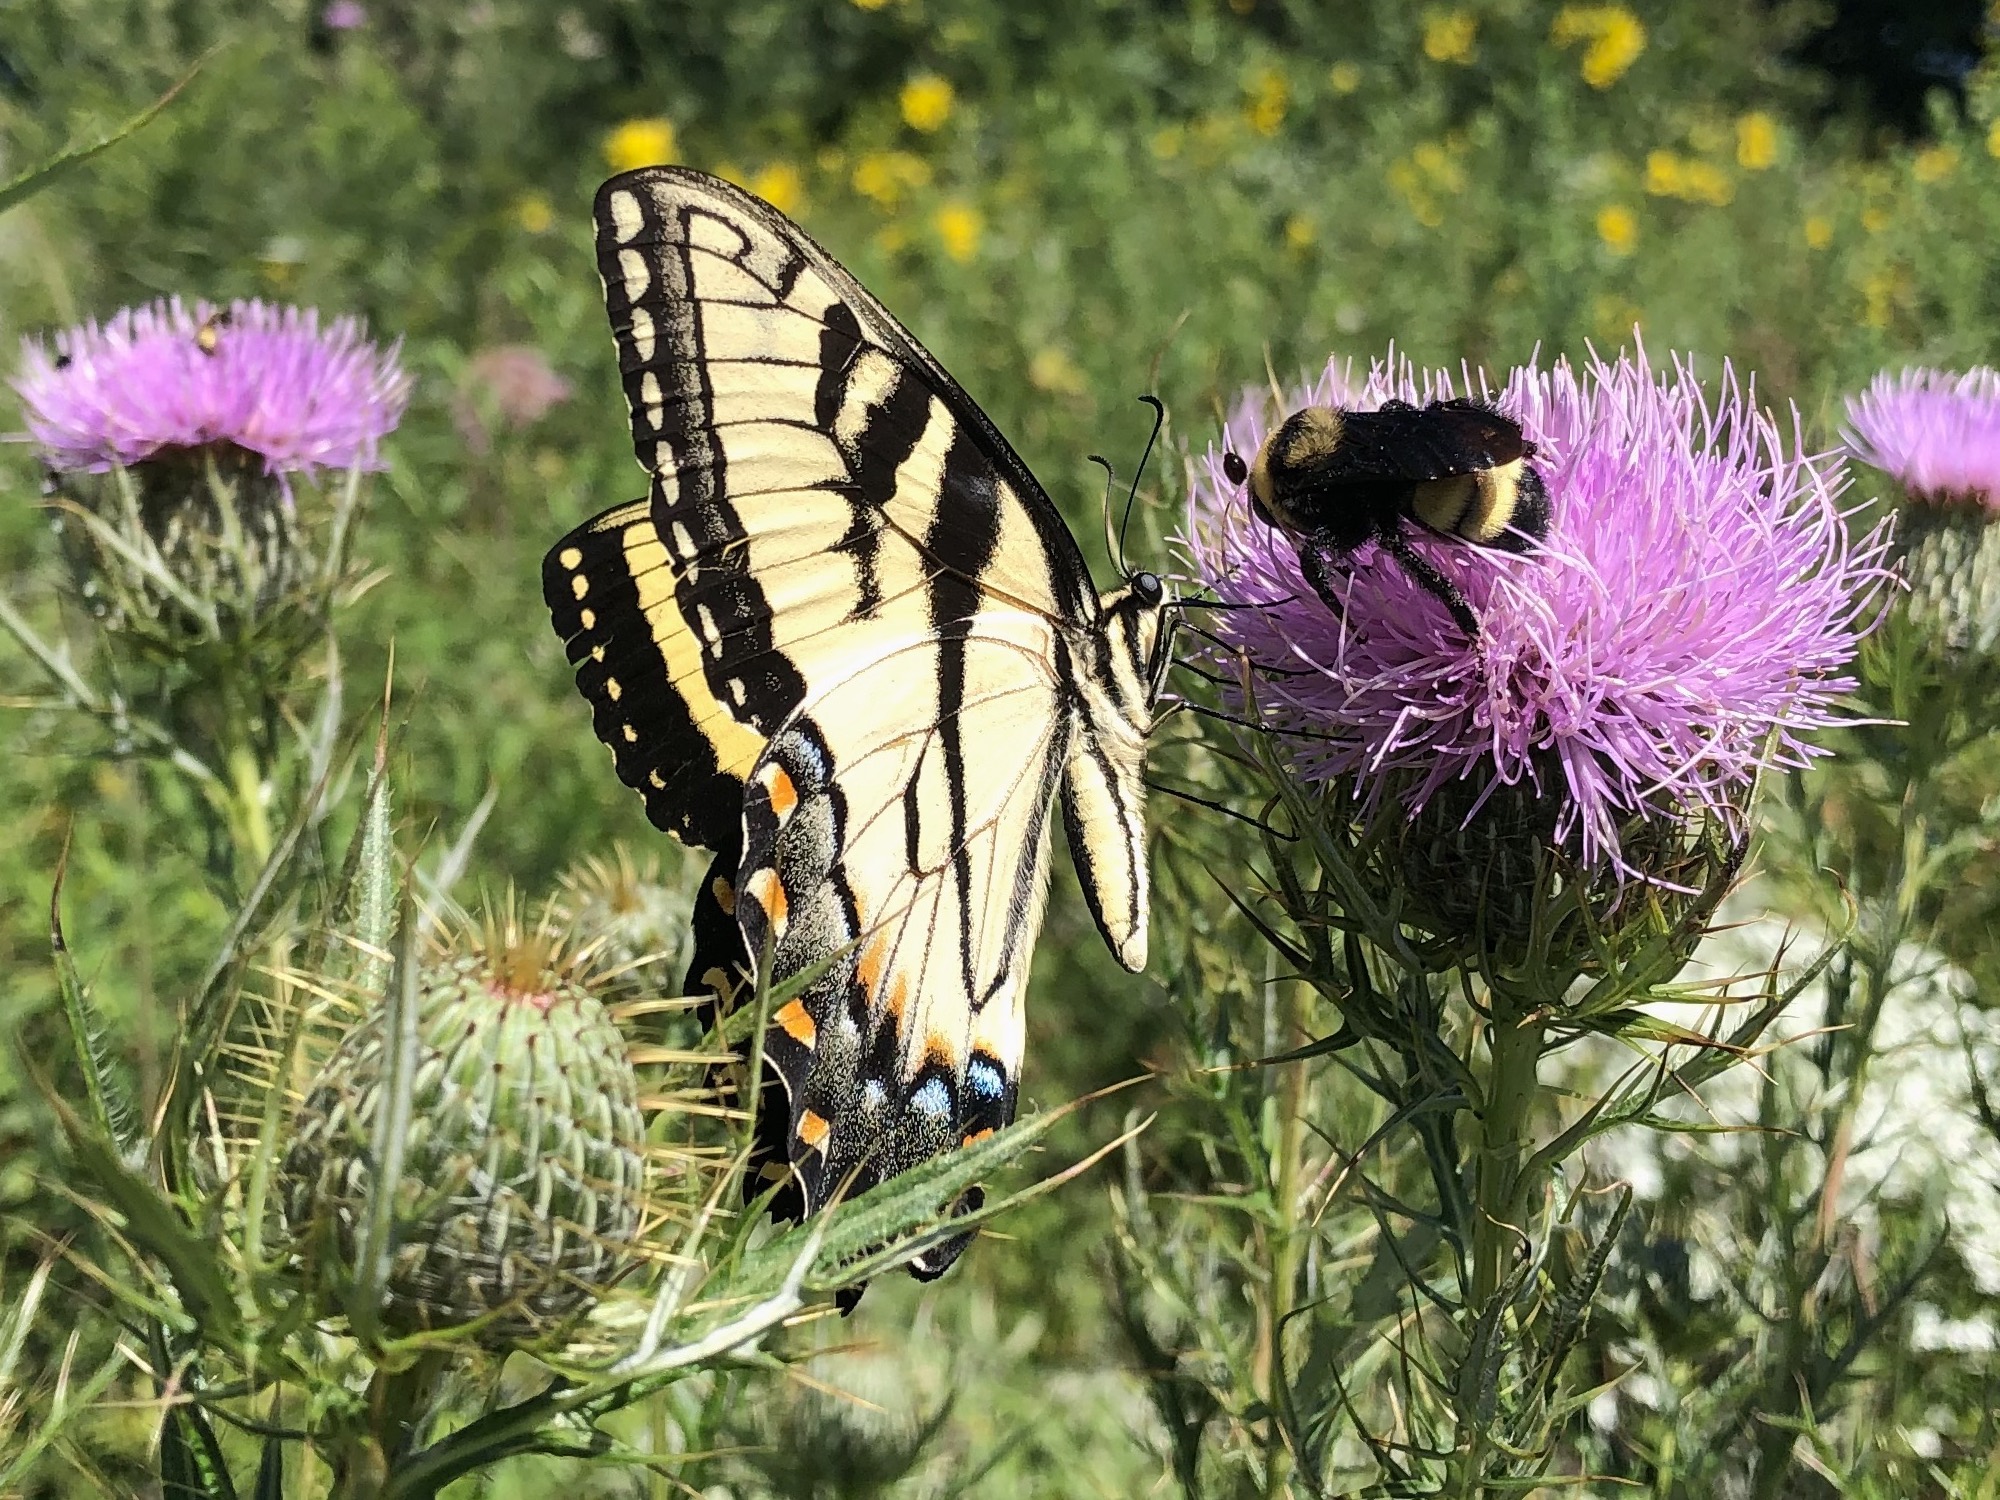 Bumblebee and Tiger Swallowtail Butterfly on Thistle on August 16, 2020.